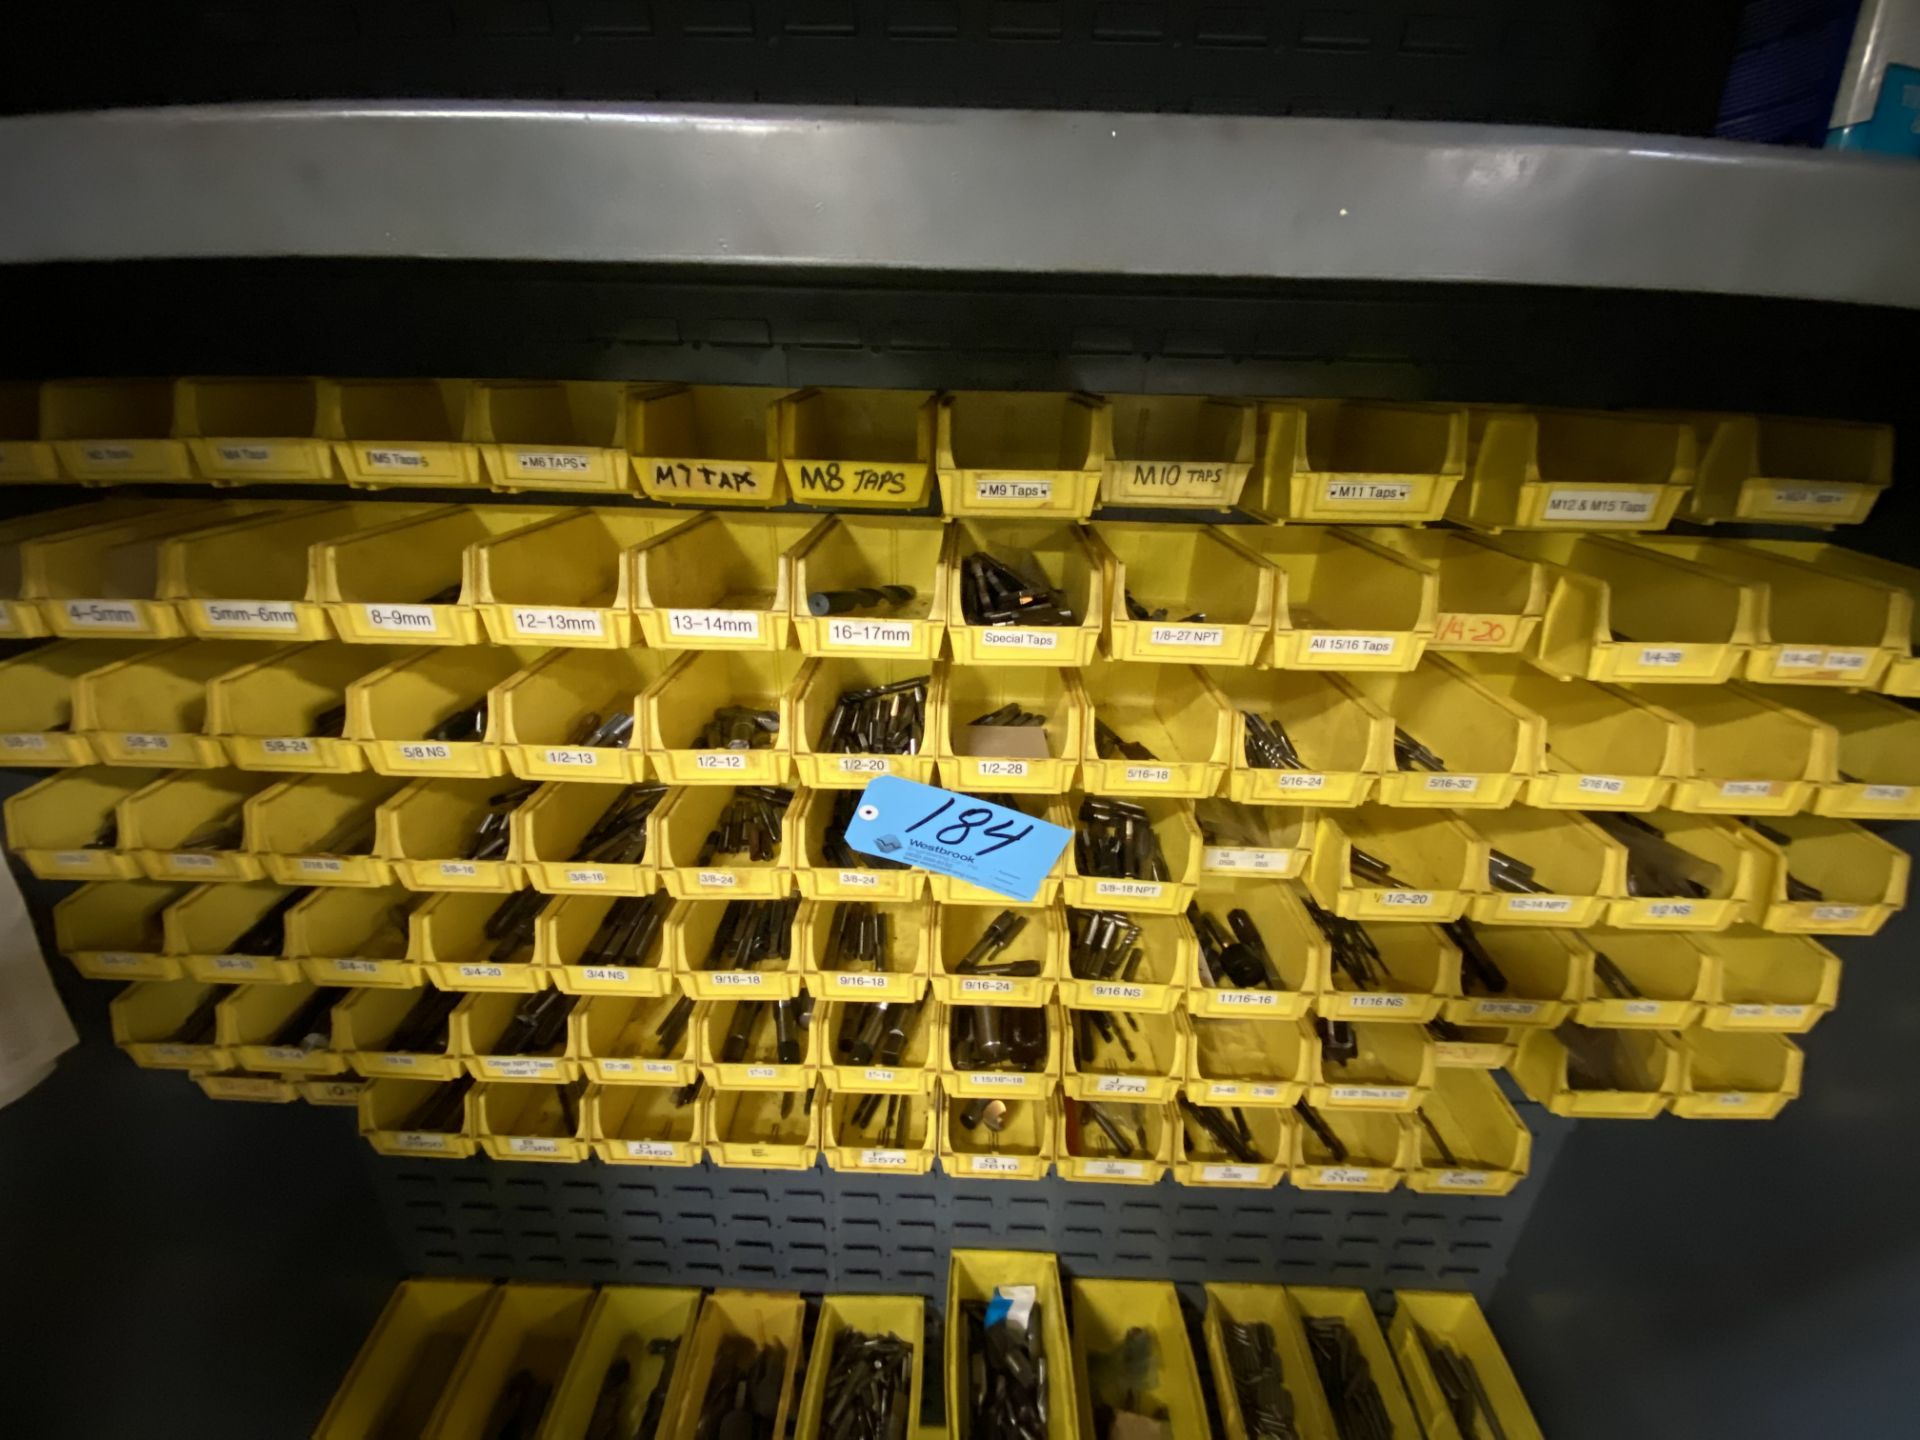 Lot-Taps, Drills and Various Cutters with Plastic Bins in Upper (7) Rows